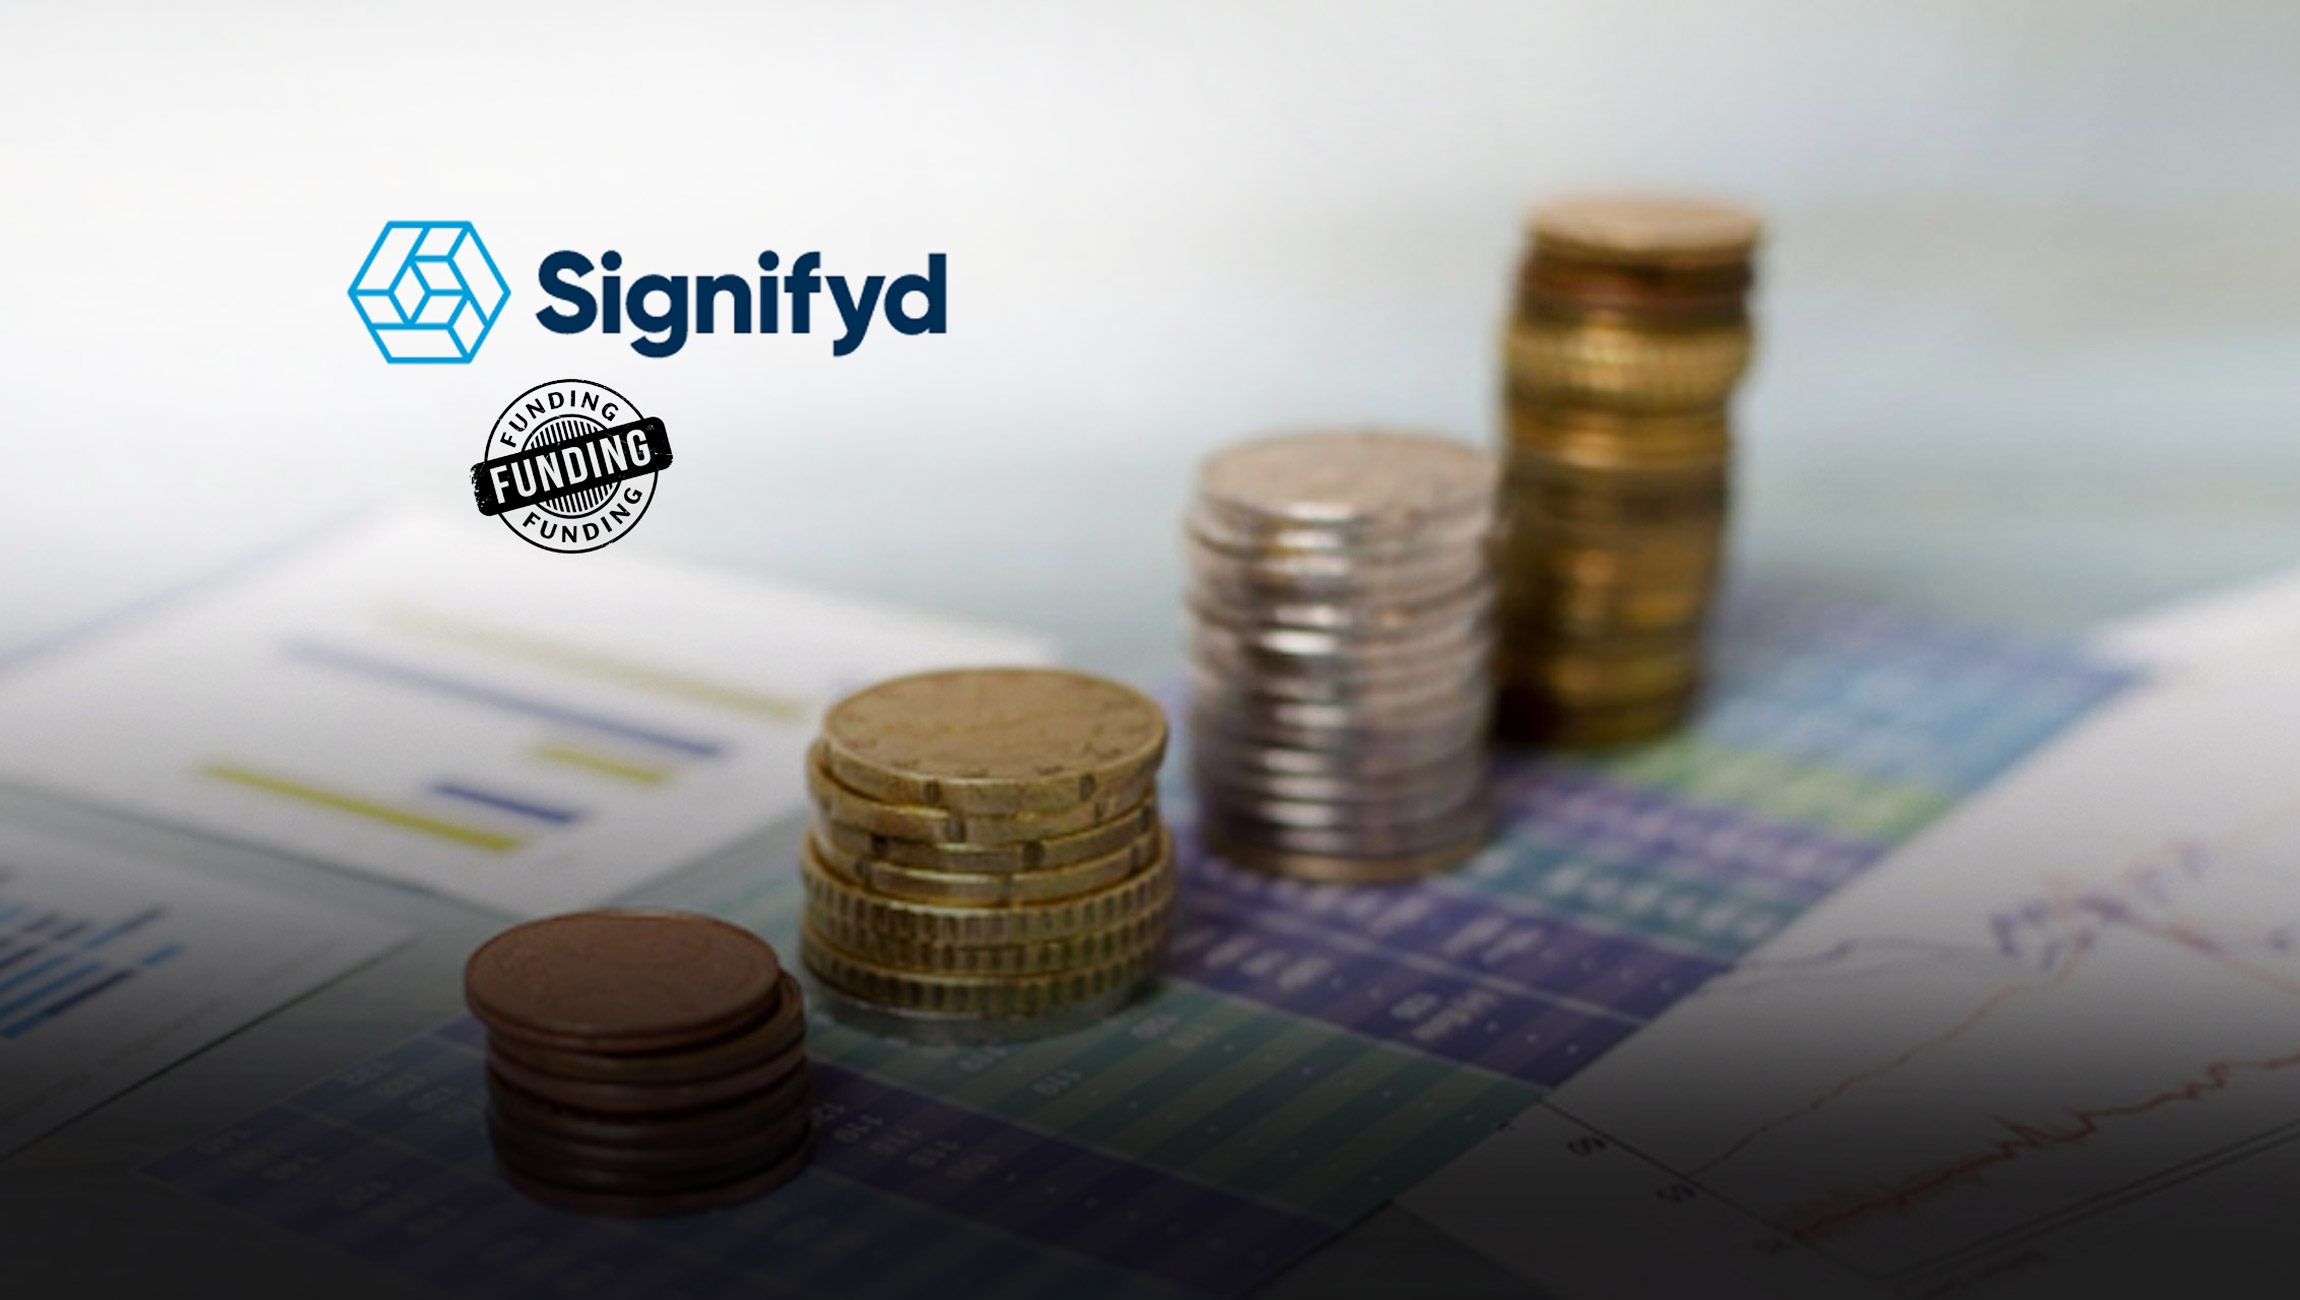 Signifyd Closes $205 Million Funding Round to Extend Identity-Centric Commerce Protection Across Digital Shopping Globally